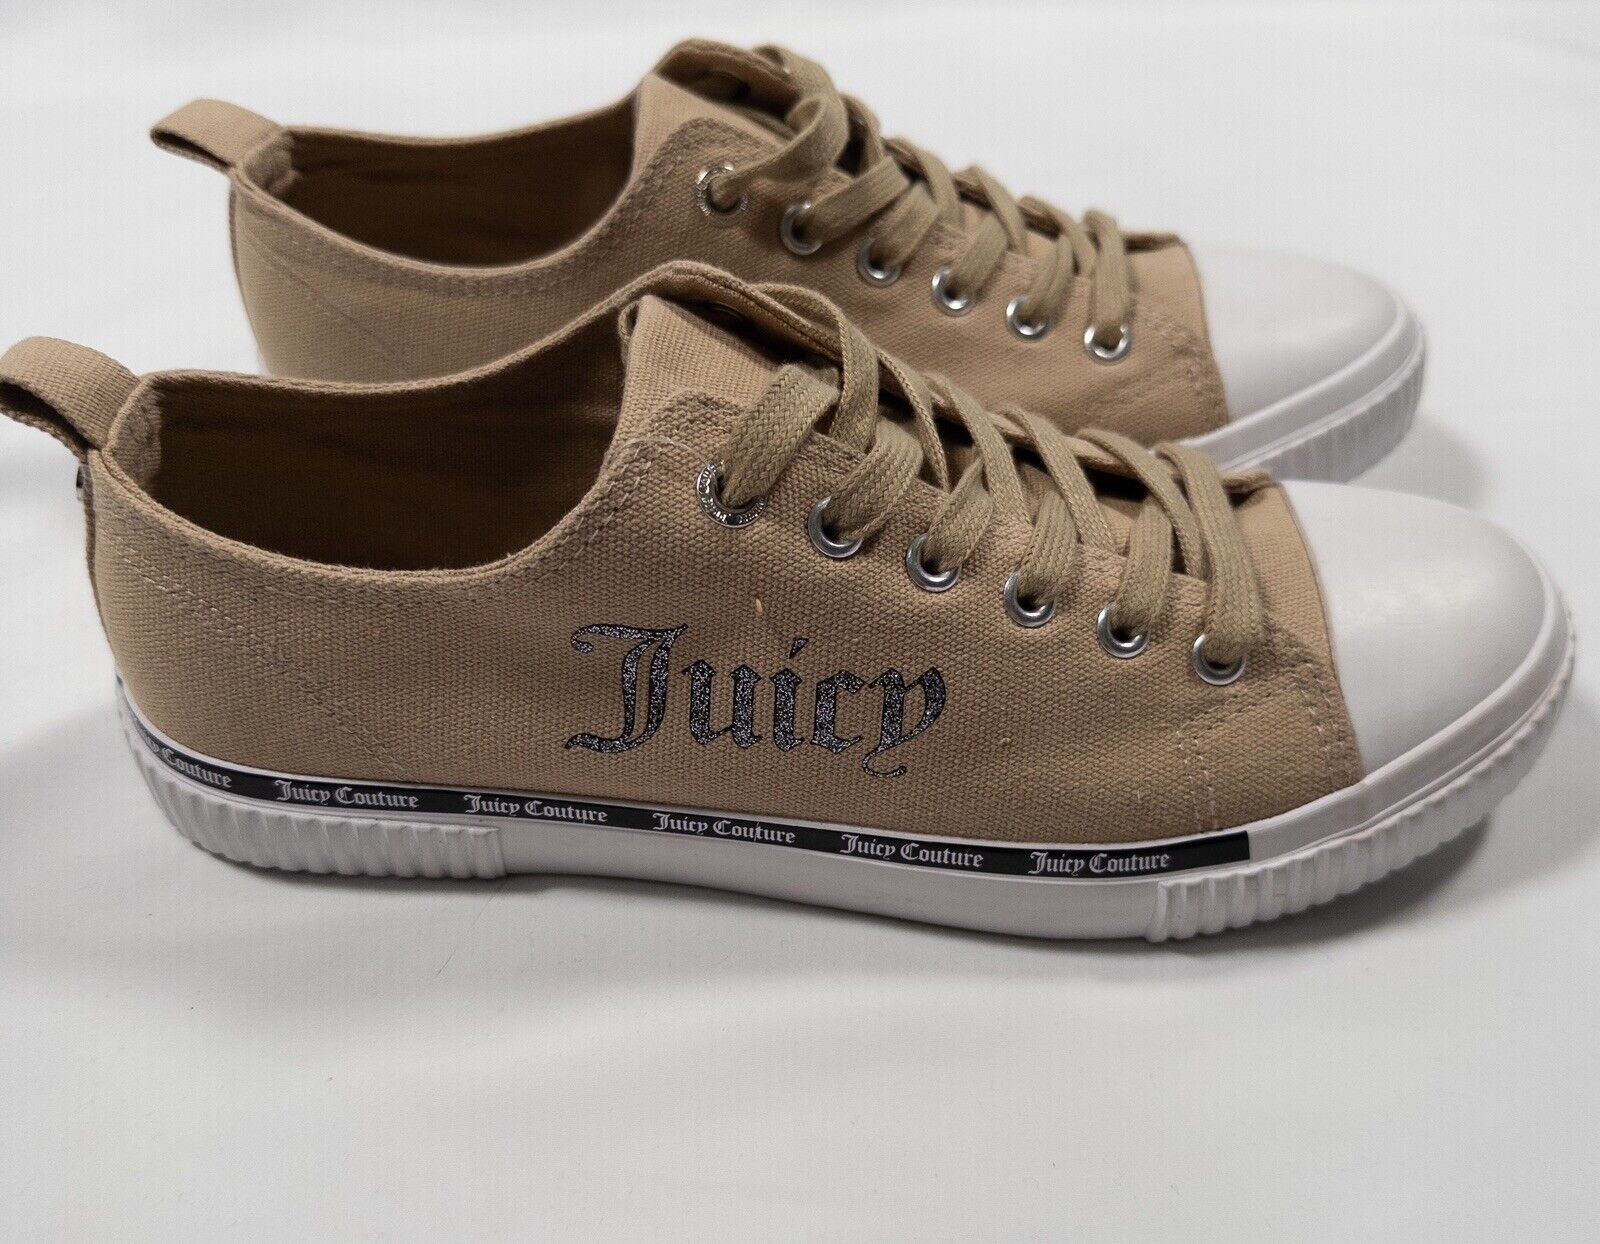 Juicy Couture Women's Brown Canvas Trainers Shoes Size UK 7